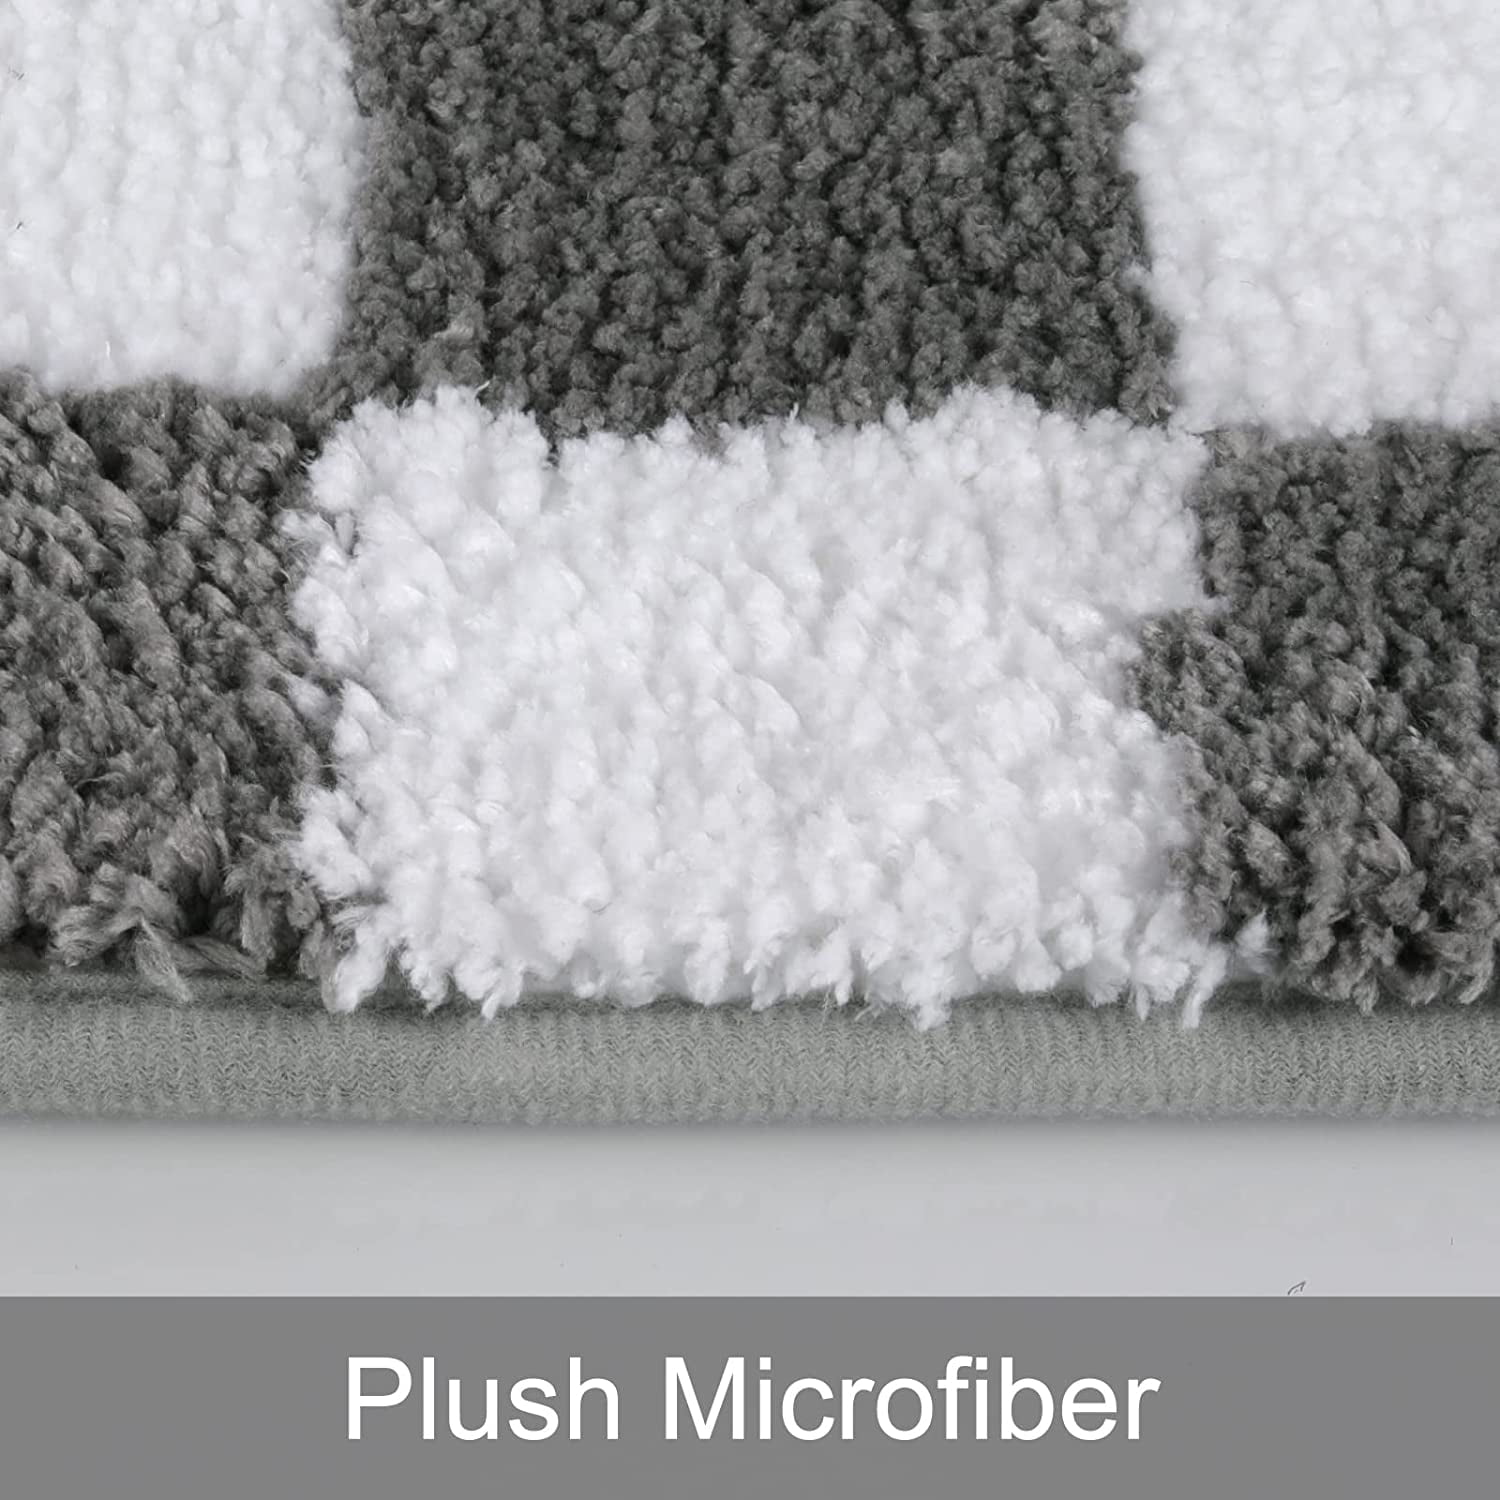  HOTBALZER Non-Slip Bathroom Rugs, Checkered Extra Soft Cute Bath  Mats, Water Absorbent, Machine Washable Small Bath Carpet for Tub, Shower  Sink(16x24, Grey) : Home & Kitchen